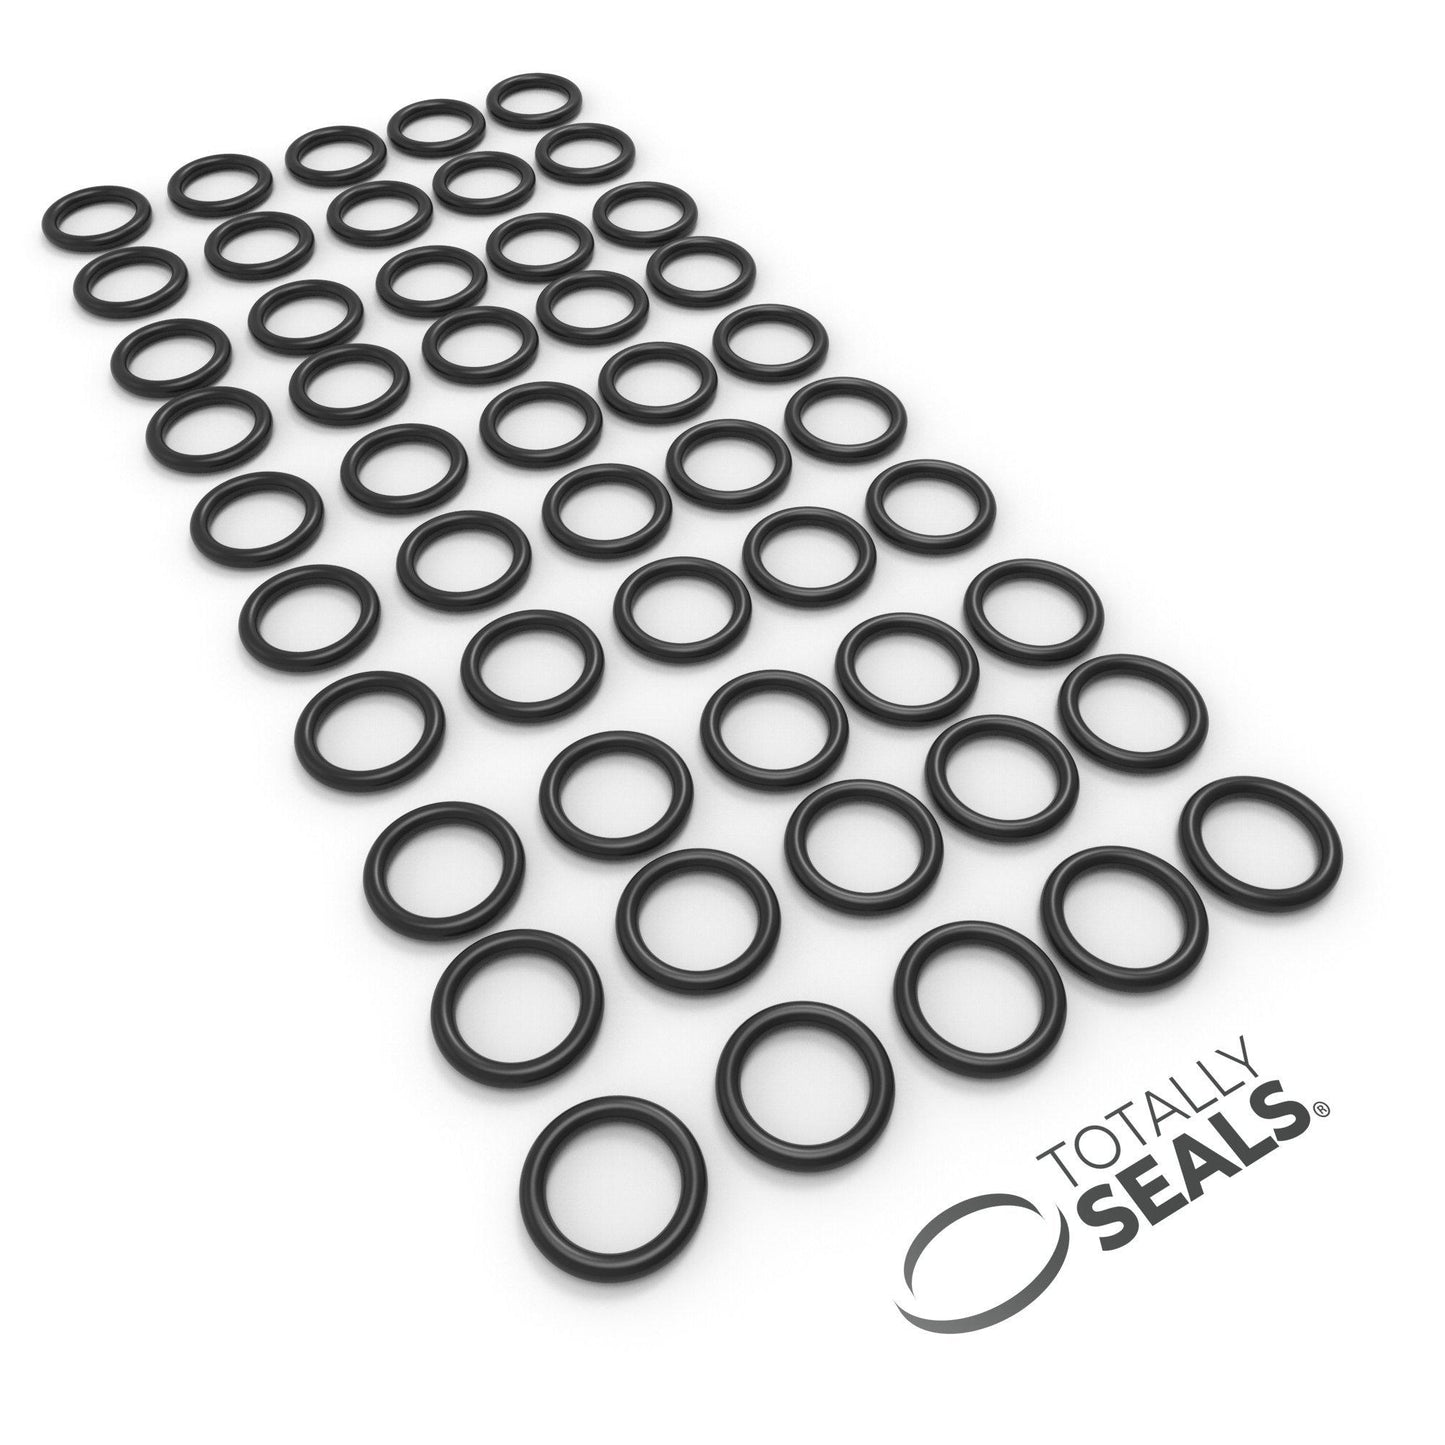 40mm x 1mm (42mm OD) Nitrile O-Rings - Totally Seals®